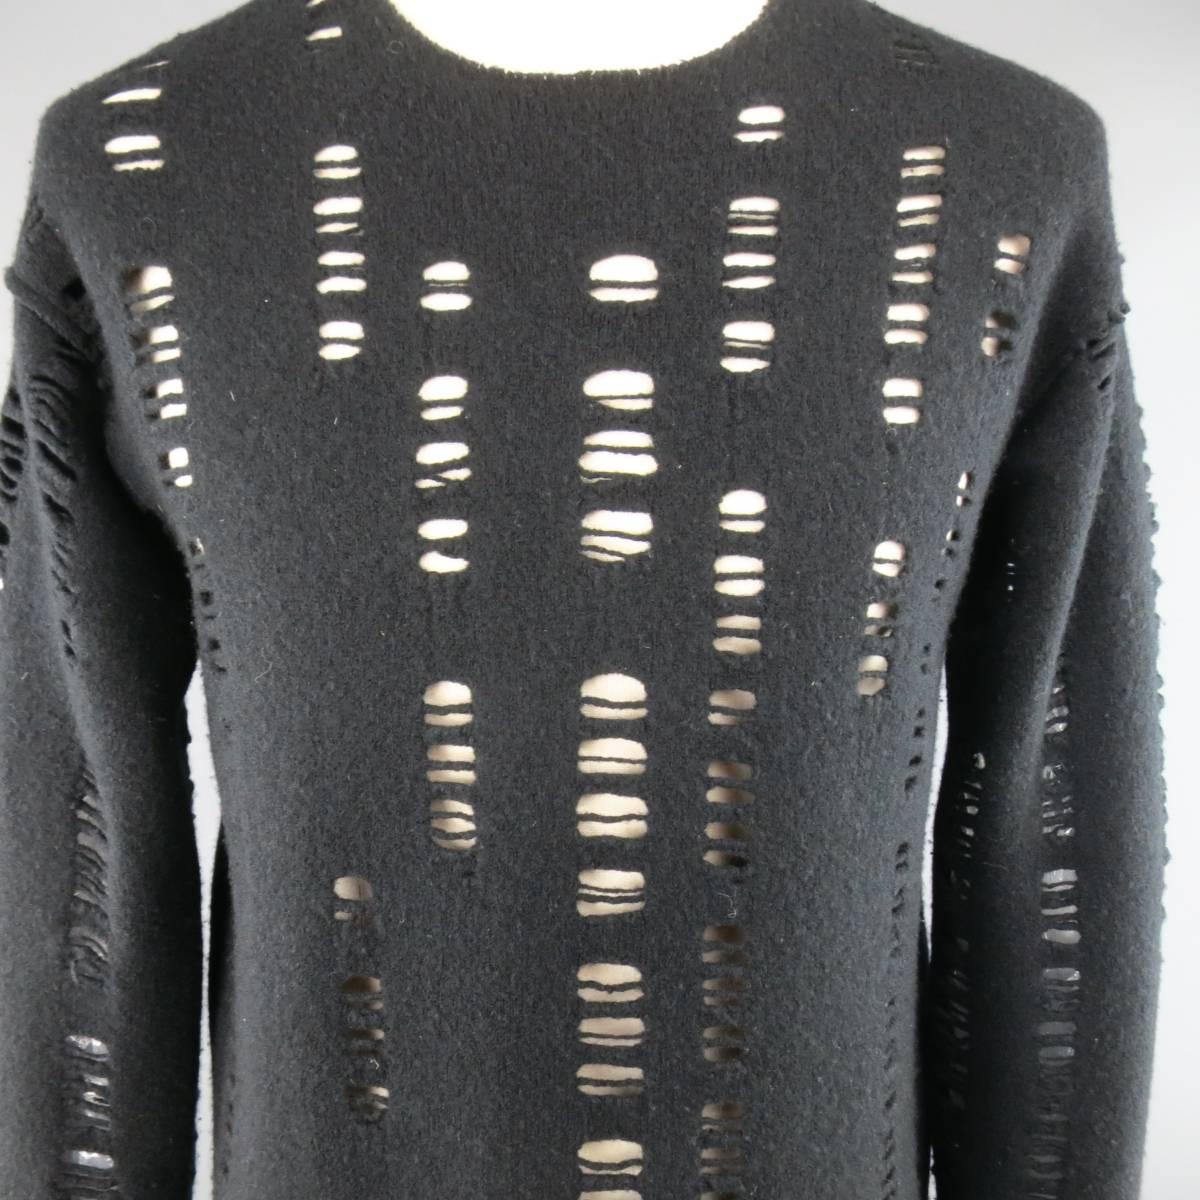 DAMIR DOMA pullover in a wool cashmere felt knit featuring raw edge hems and faud distressing throughout. Made in Italy.
 
Good Pre-Owned Condition.
Marked: IT 48
 
Measurements:
 
Shoulder: 22 in.
Chest: 42 in.
Sleeve: 27 in.
Length: 32 in.